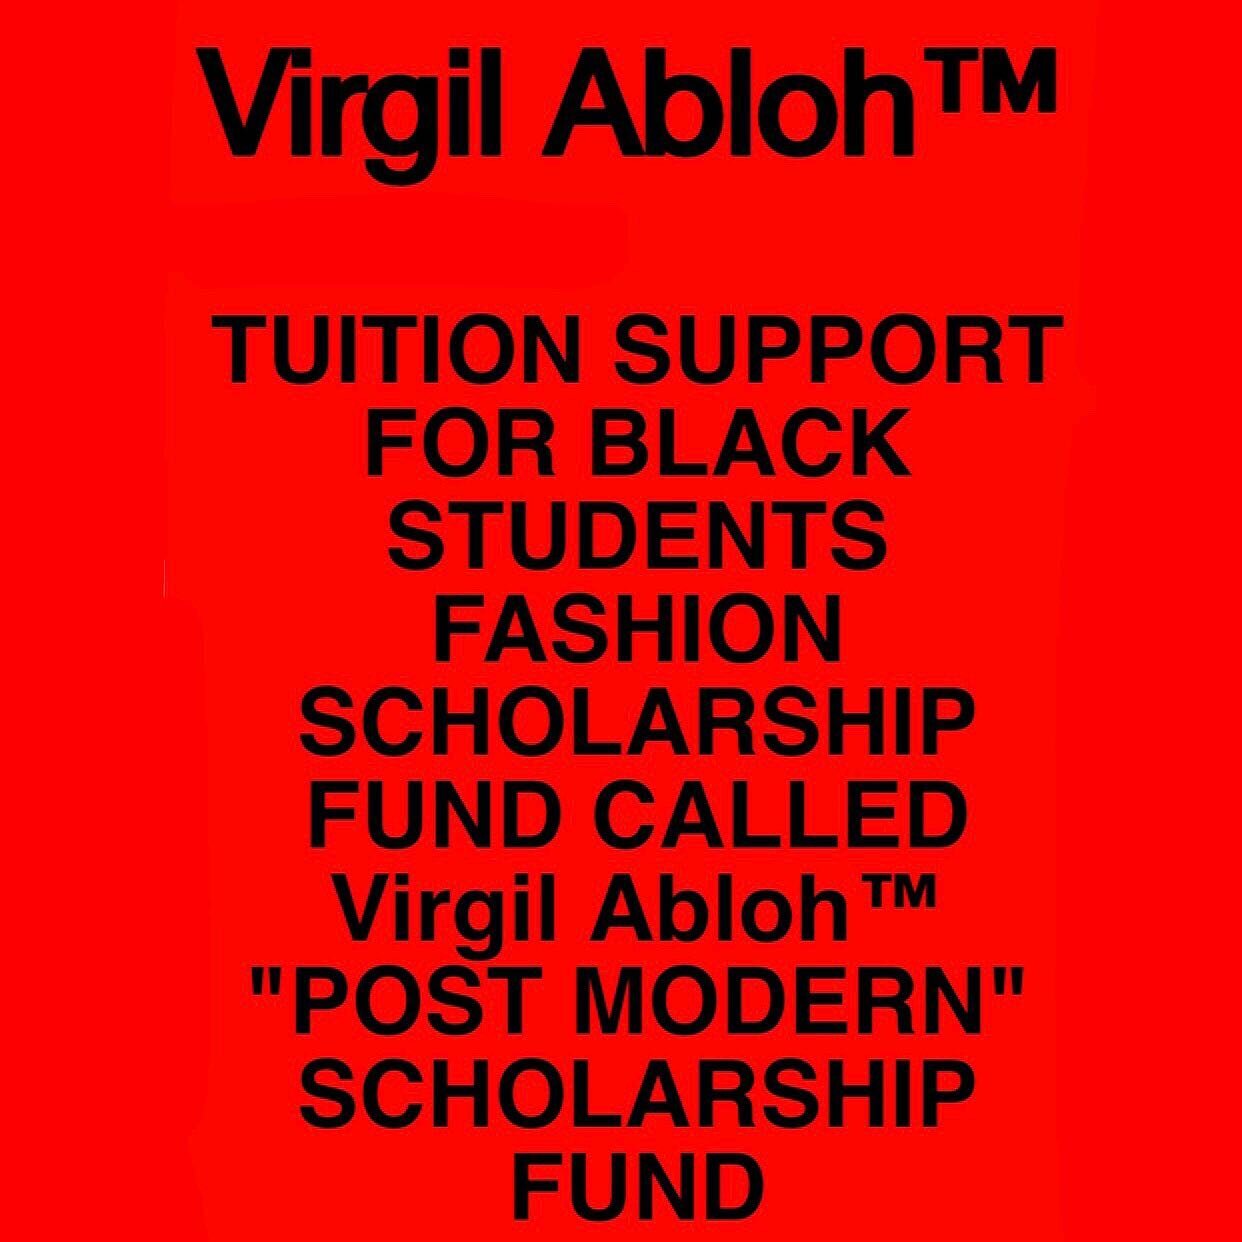 Here&rsquo;s another amazing opportunity for young black student designers from @virgilabloh &amp; his brand partners. 

#Repost @virgilabloh
・・・
anyone that&rsquo;s ever been in a meeting with me or a creative brainstorm or even a random iMessage ch